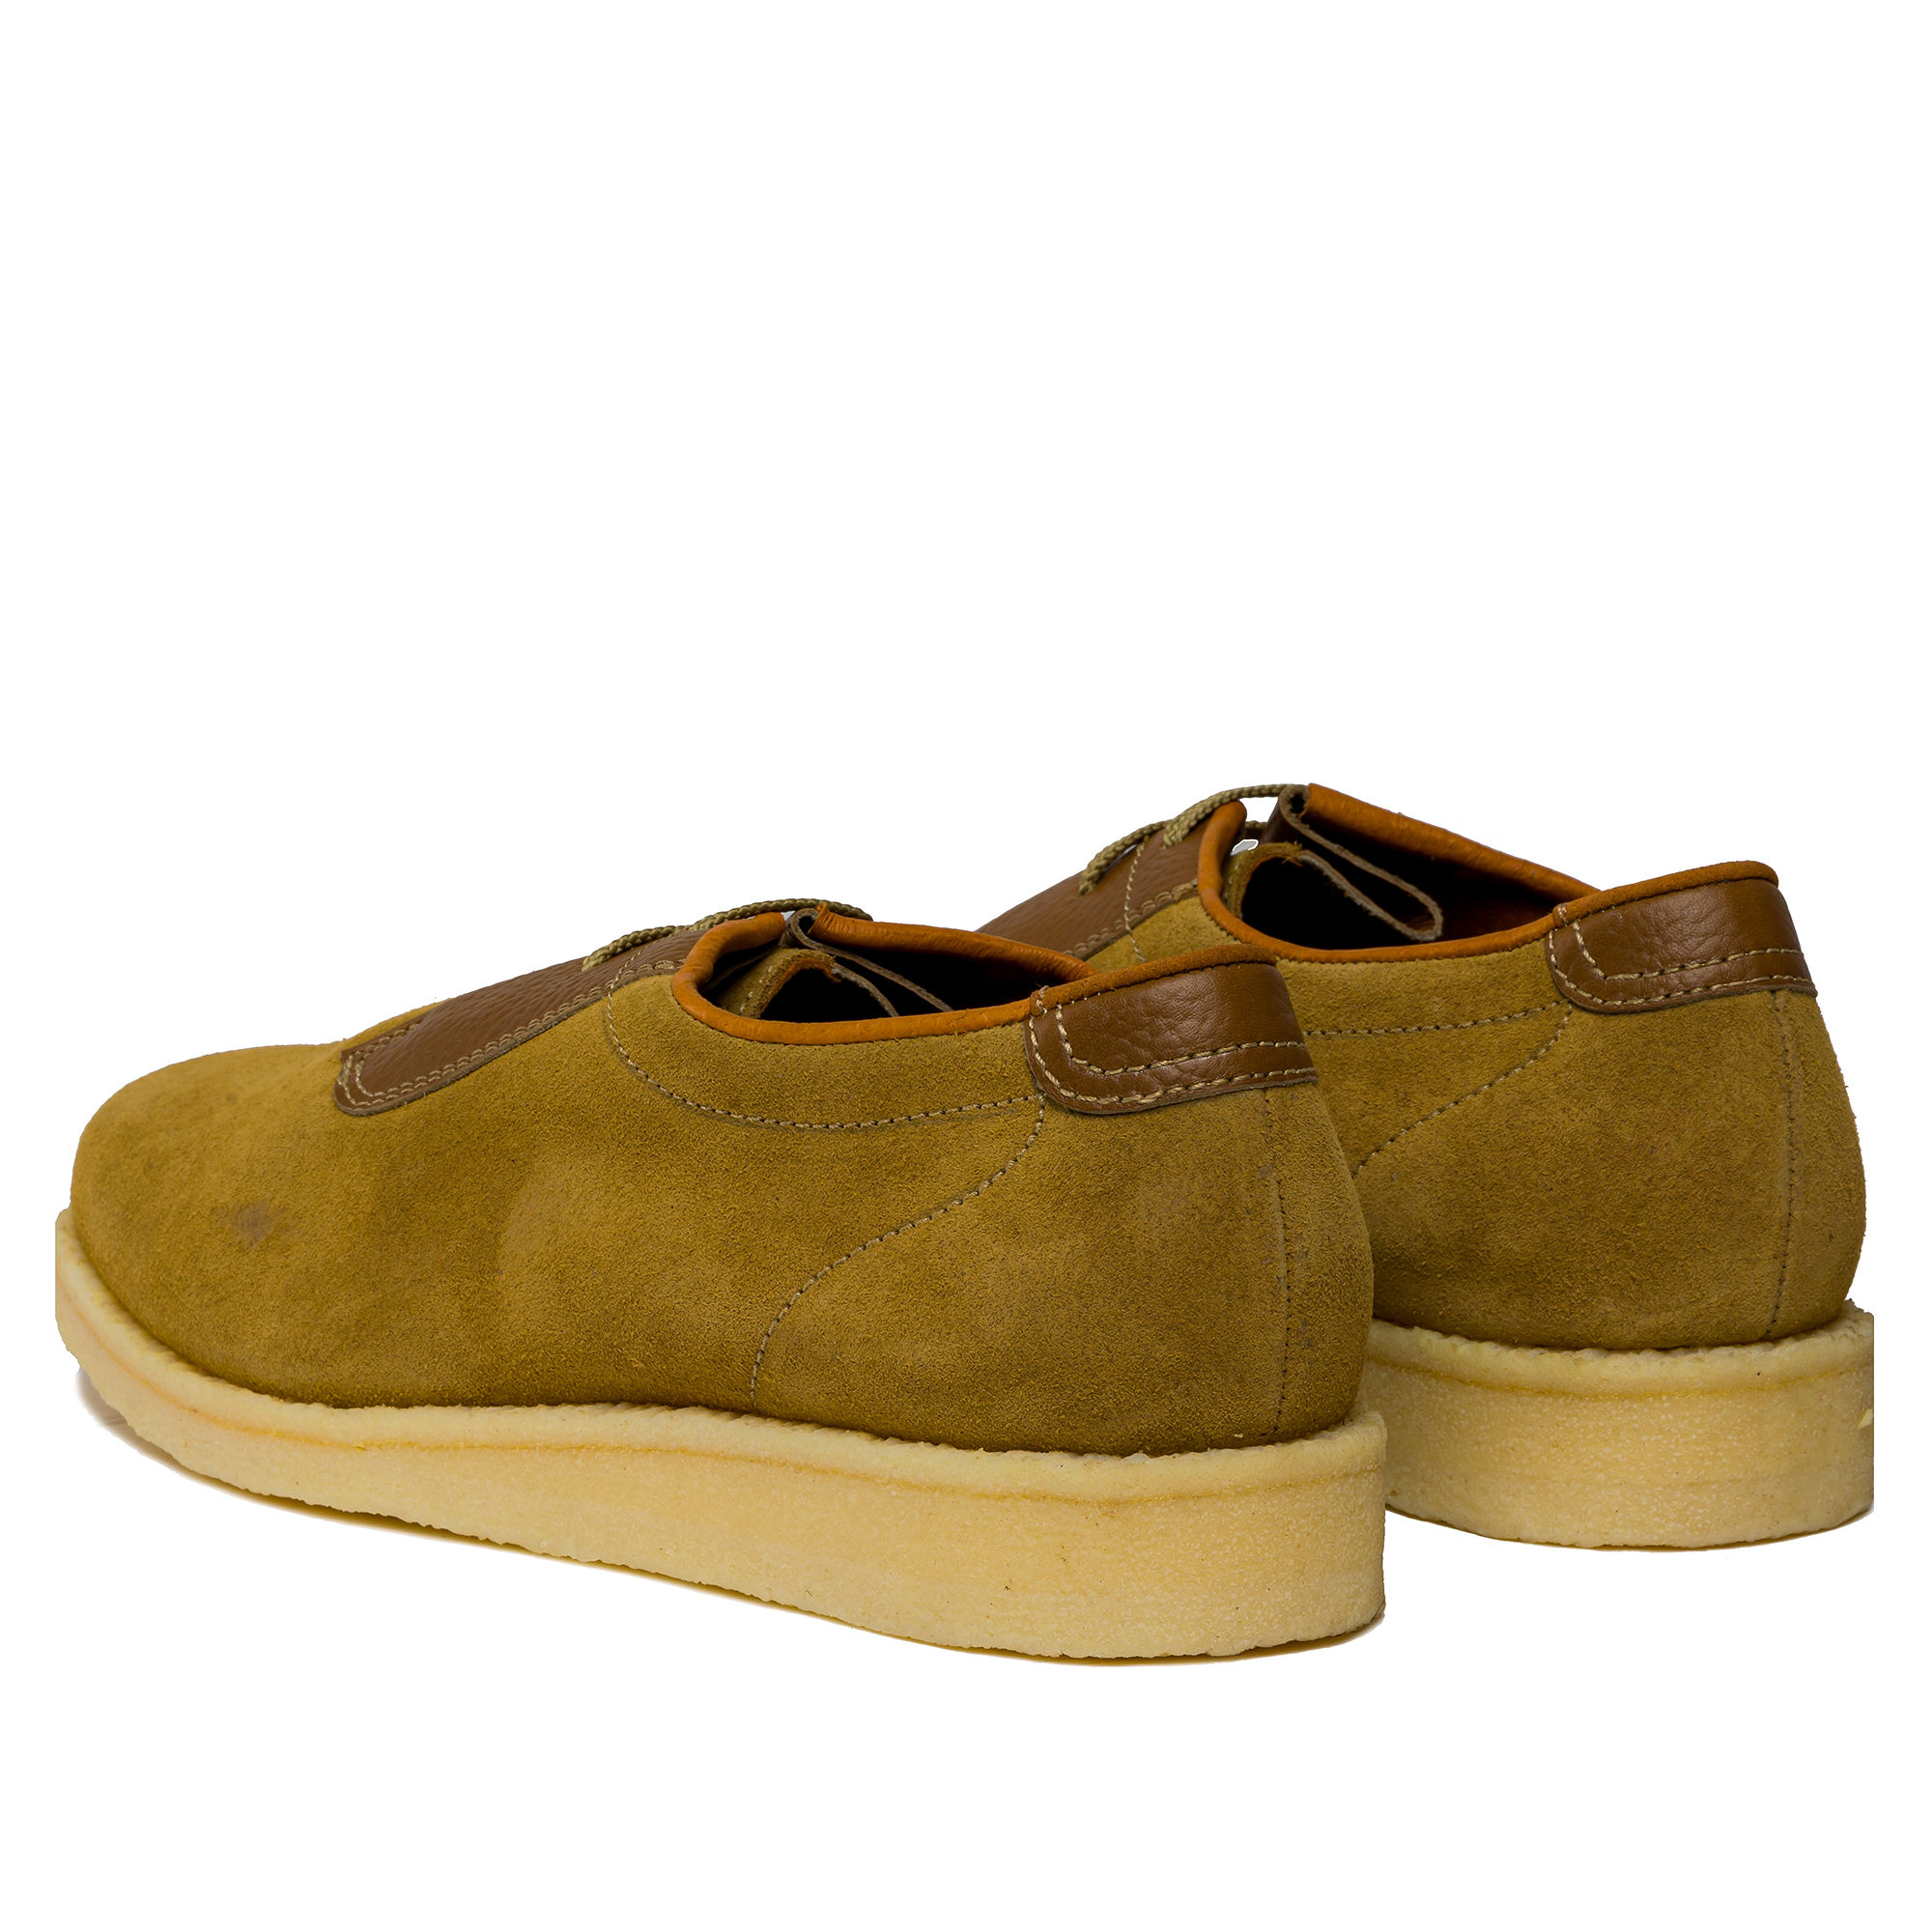 P501 Padmore & Barnes Original Sports Shoe – Terra Suede with Leather ...